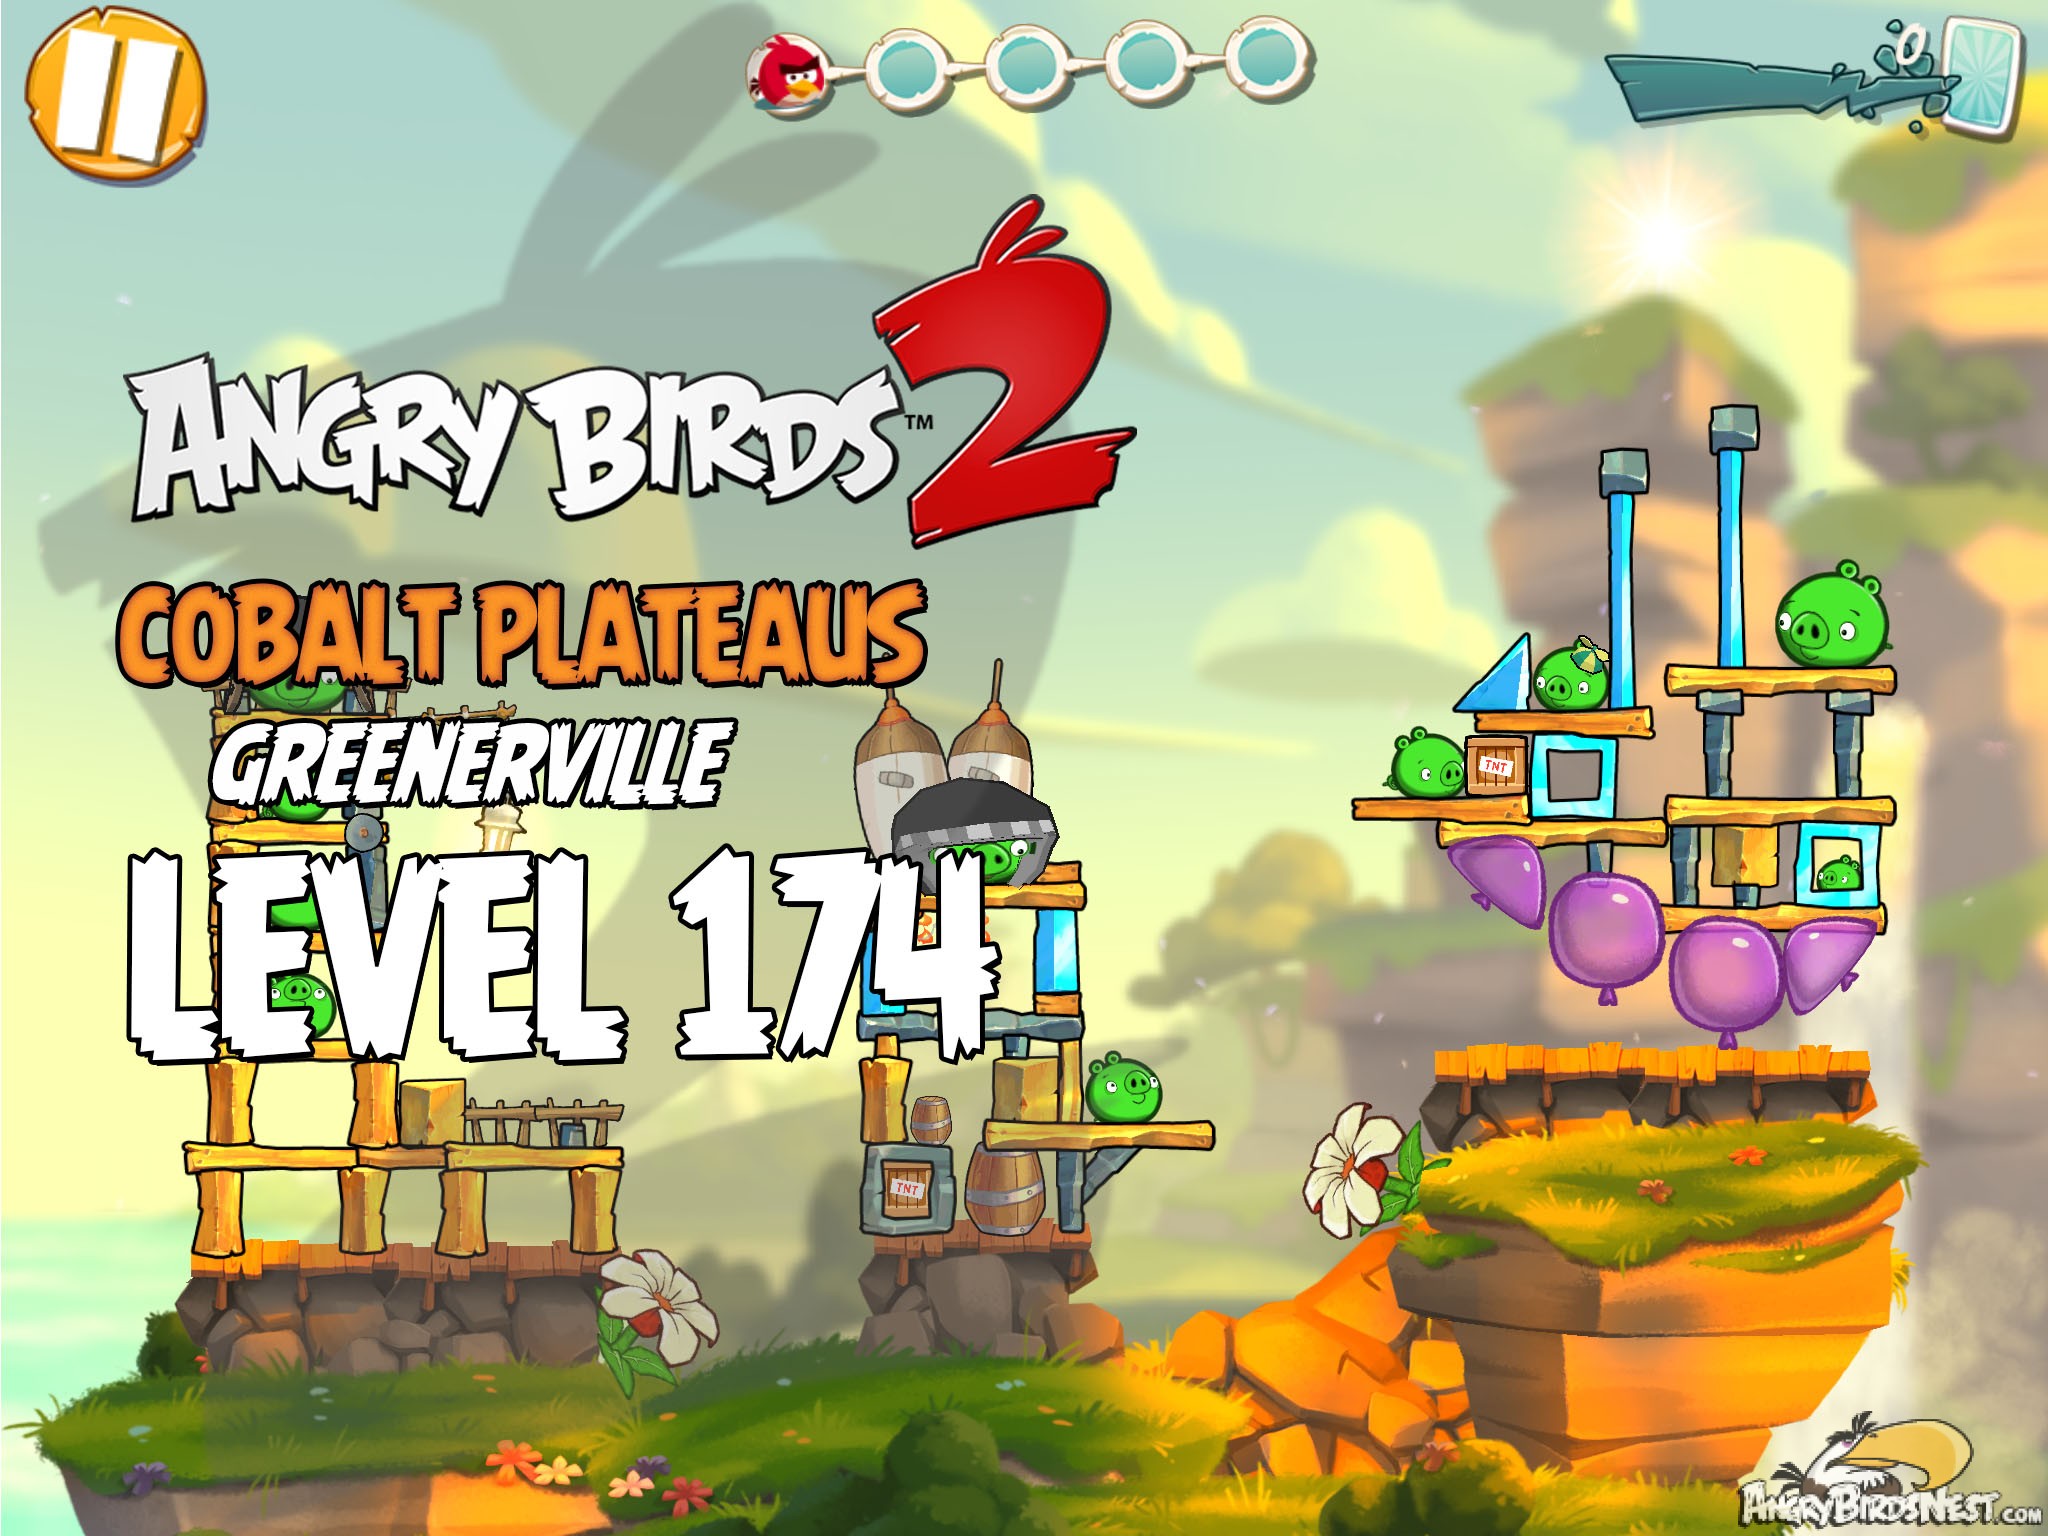 Angry Birds 2 Cobalt Plateaus Greenerville Level 174